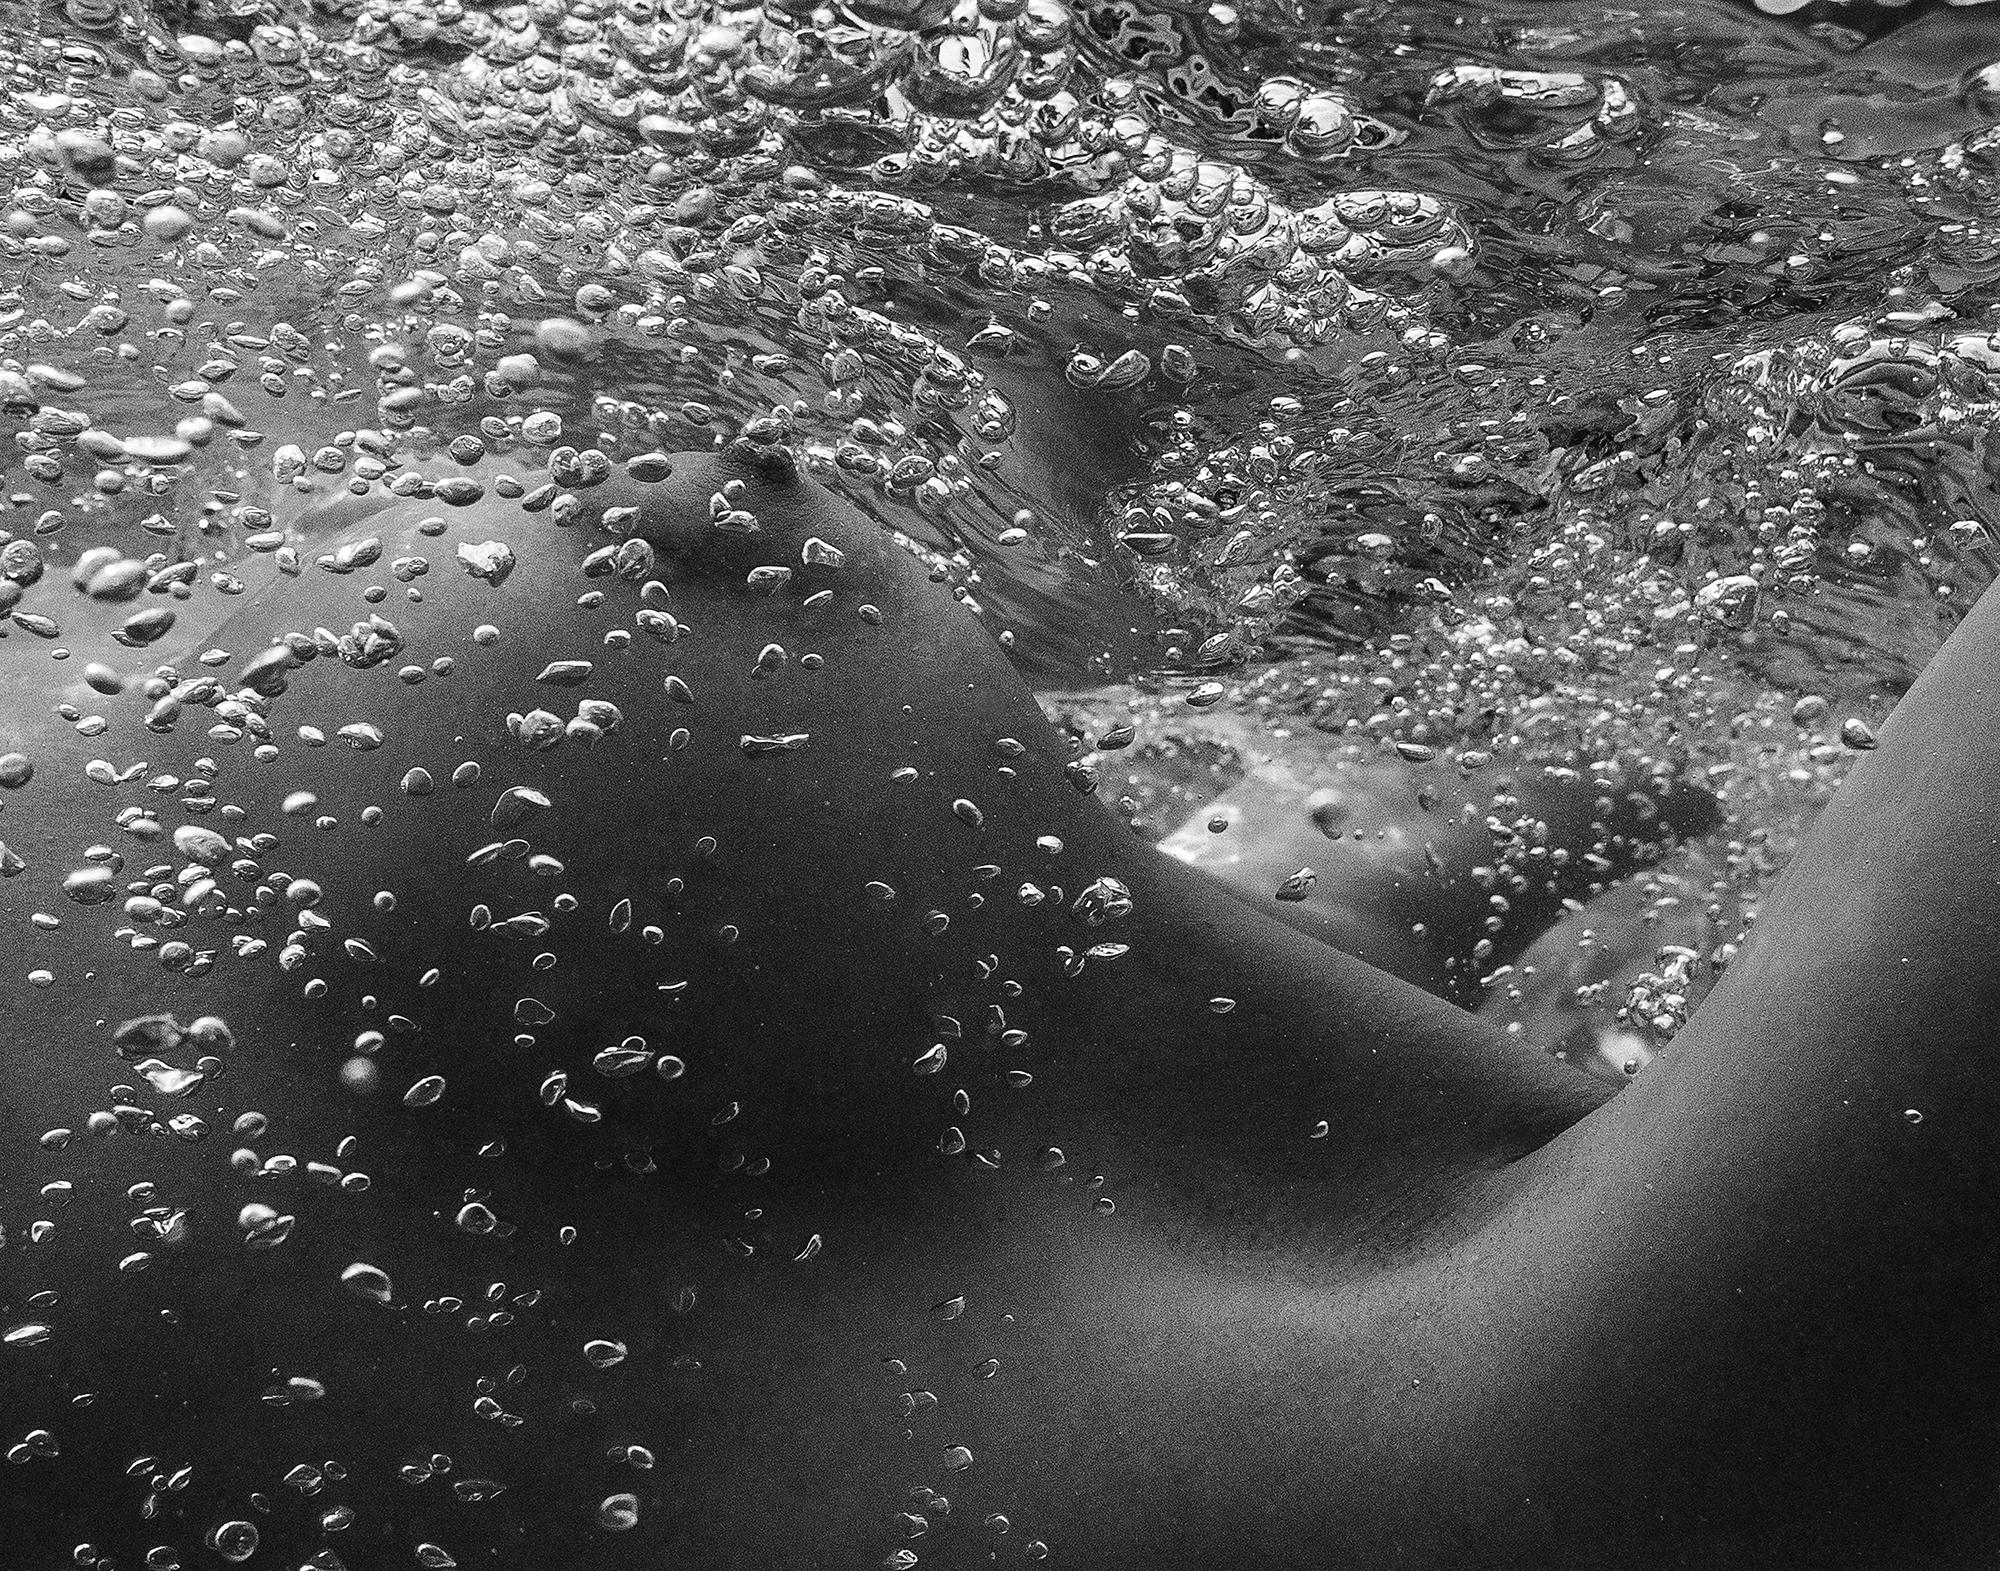 Bubbles - underwater photograph - archival pigment print - Gray Black and White Photograph by Alex Sher